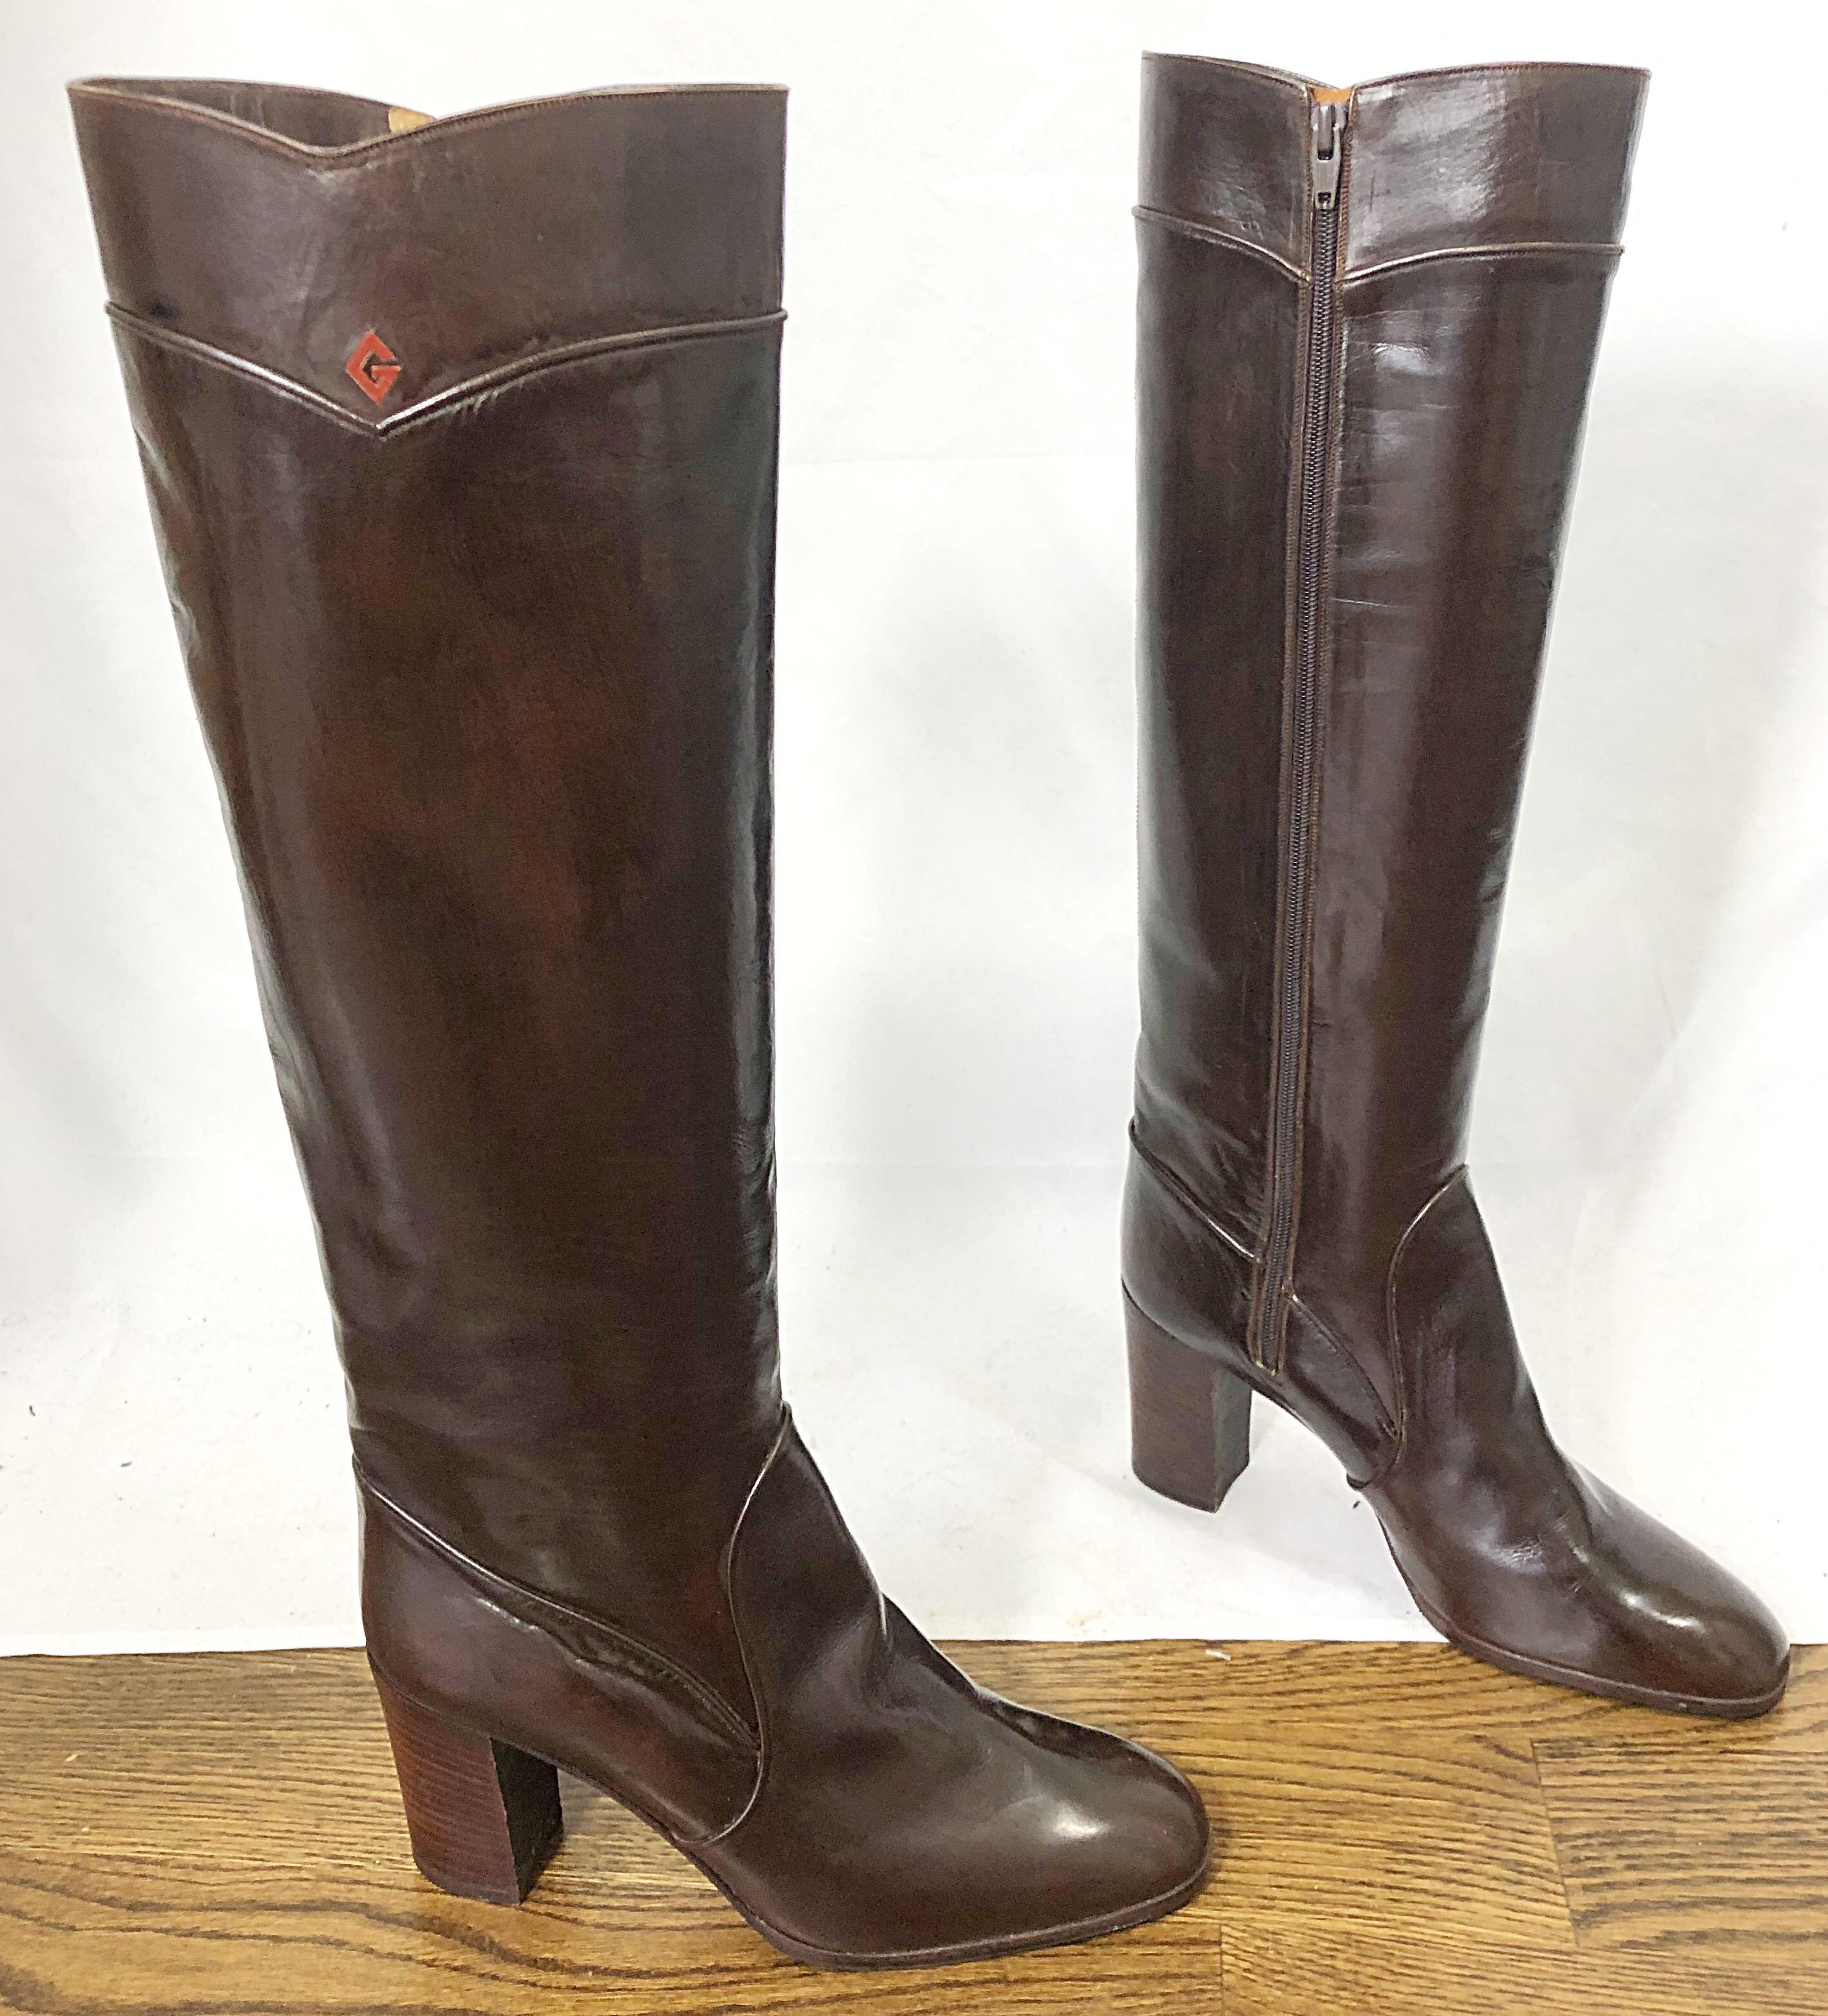 Chic 1970s vintage GUCCI Size 8.5 chocolate brown leather knee high heeled boots ! Features the perfect shade brown with the red G logo at each outter calf. Hidden zipper up the inside. Sturdy block heels are comfortable to wear all day. 
Can easily